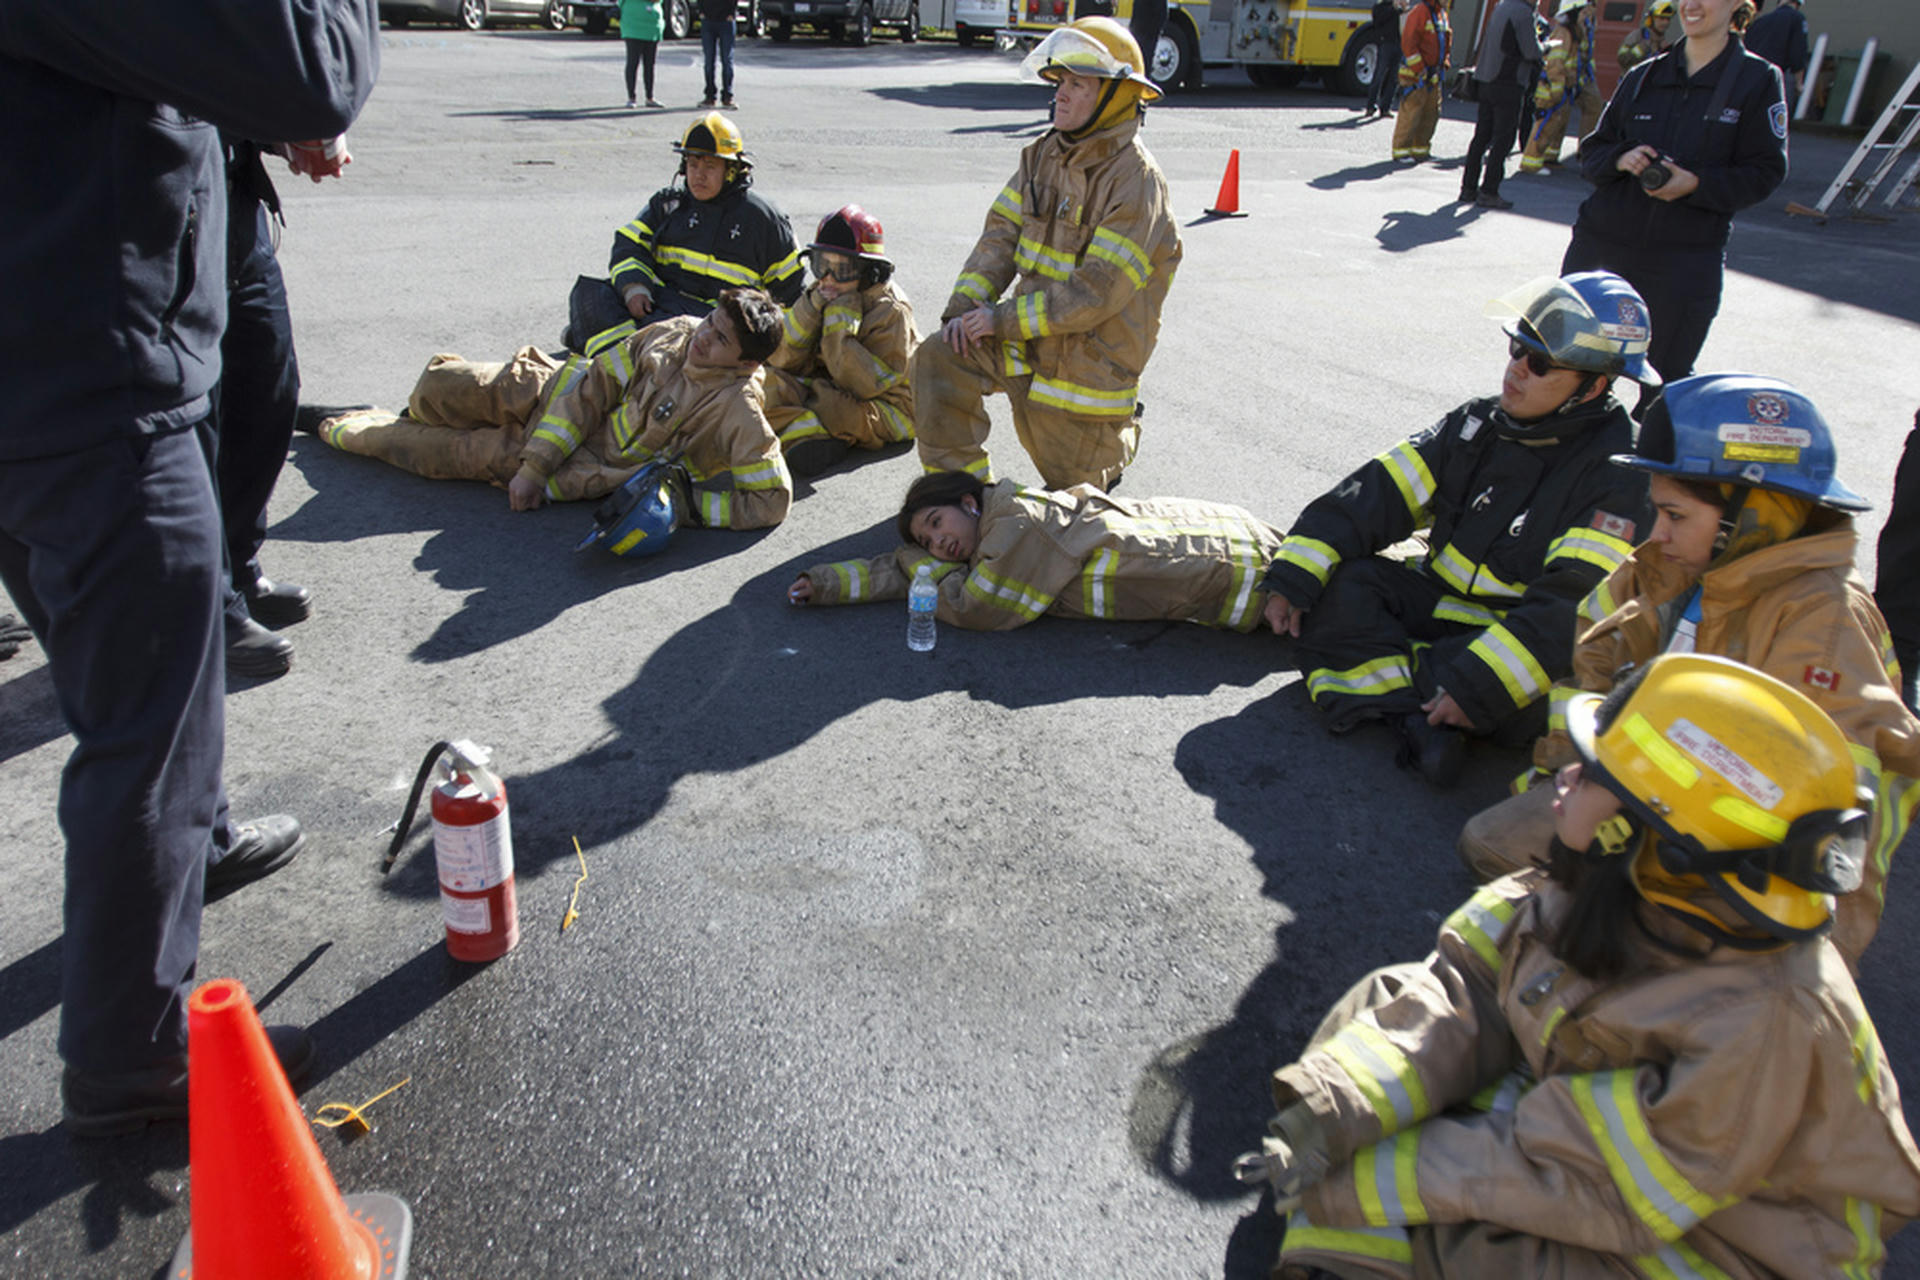 Some of the youth participated in a firefighter training workshop. Looks exhausting but fun!